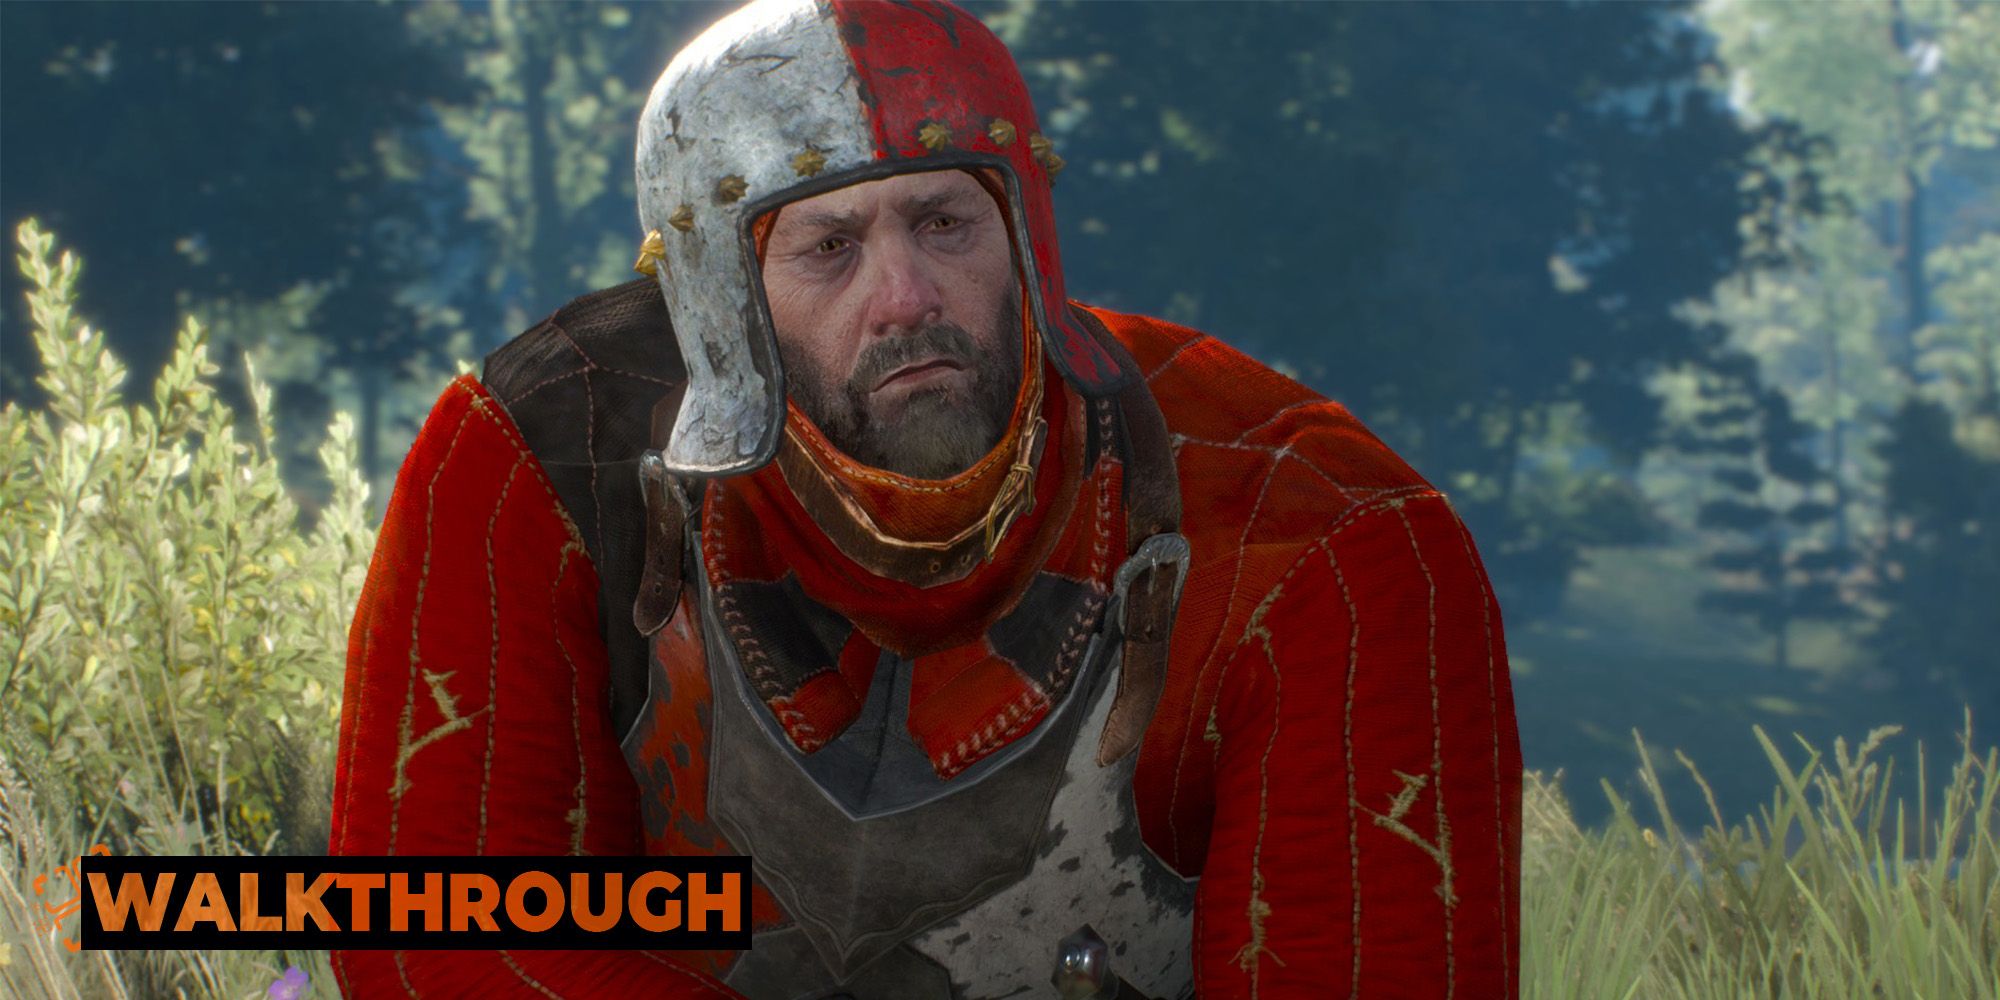 A Redanian Soldier wearing red armor scowls at the viewer in The Witcher 3.